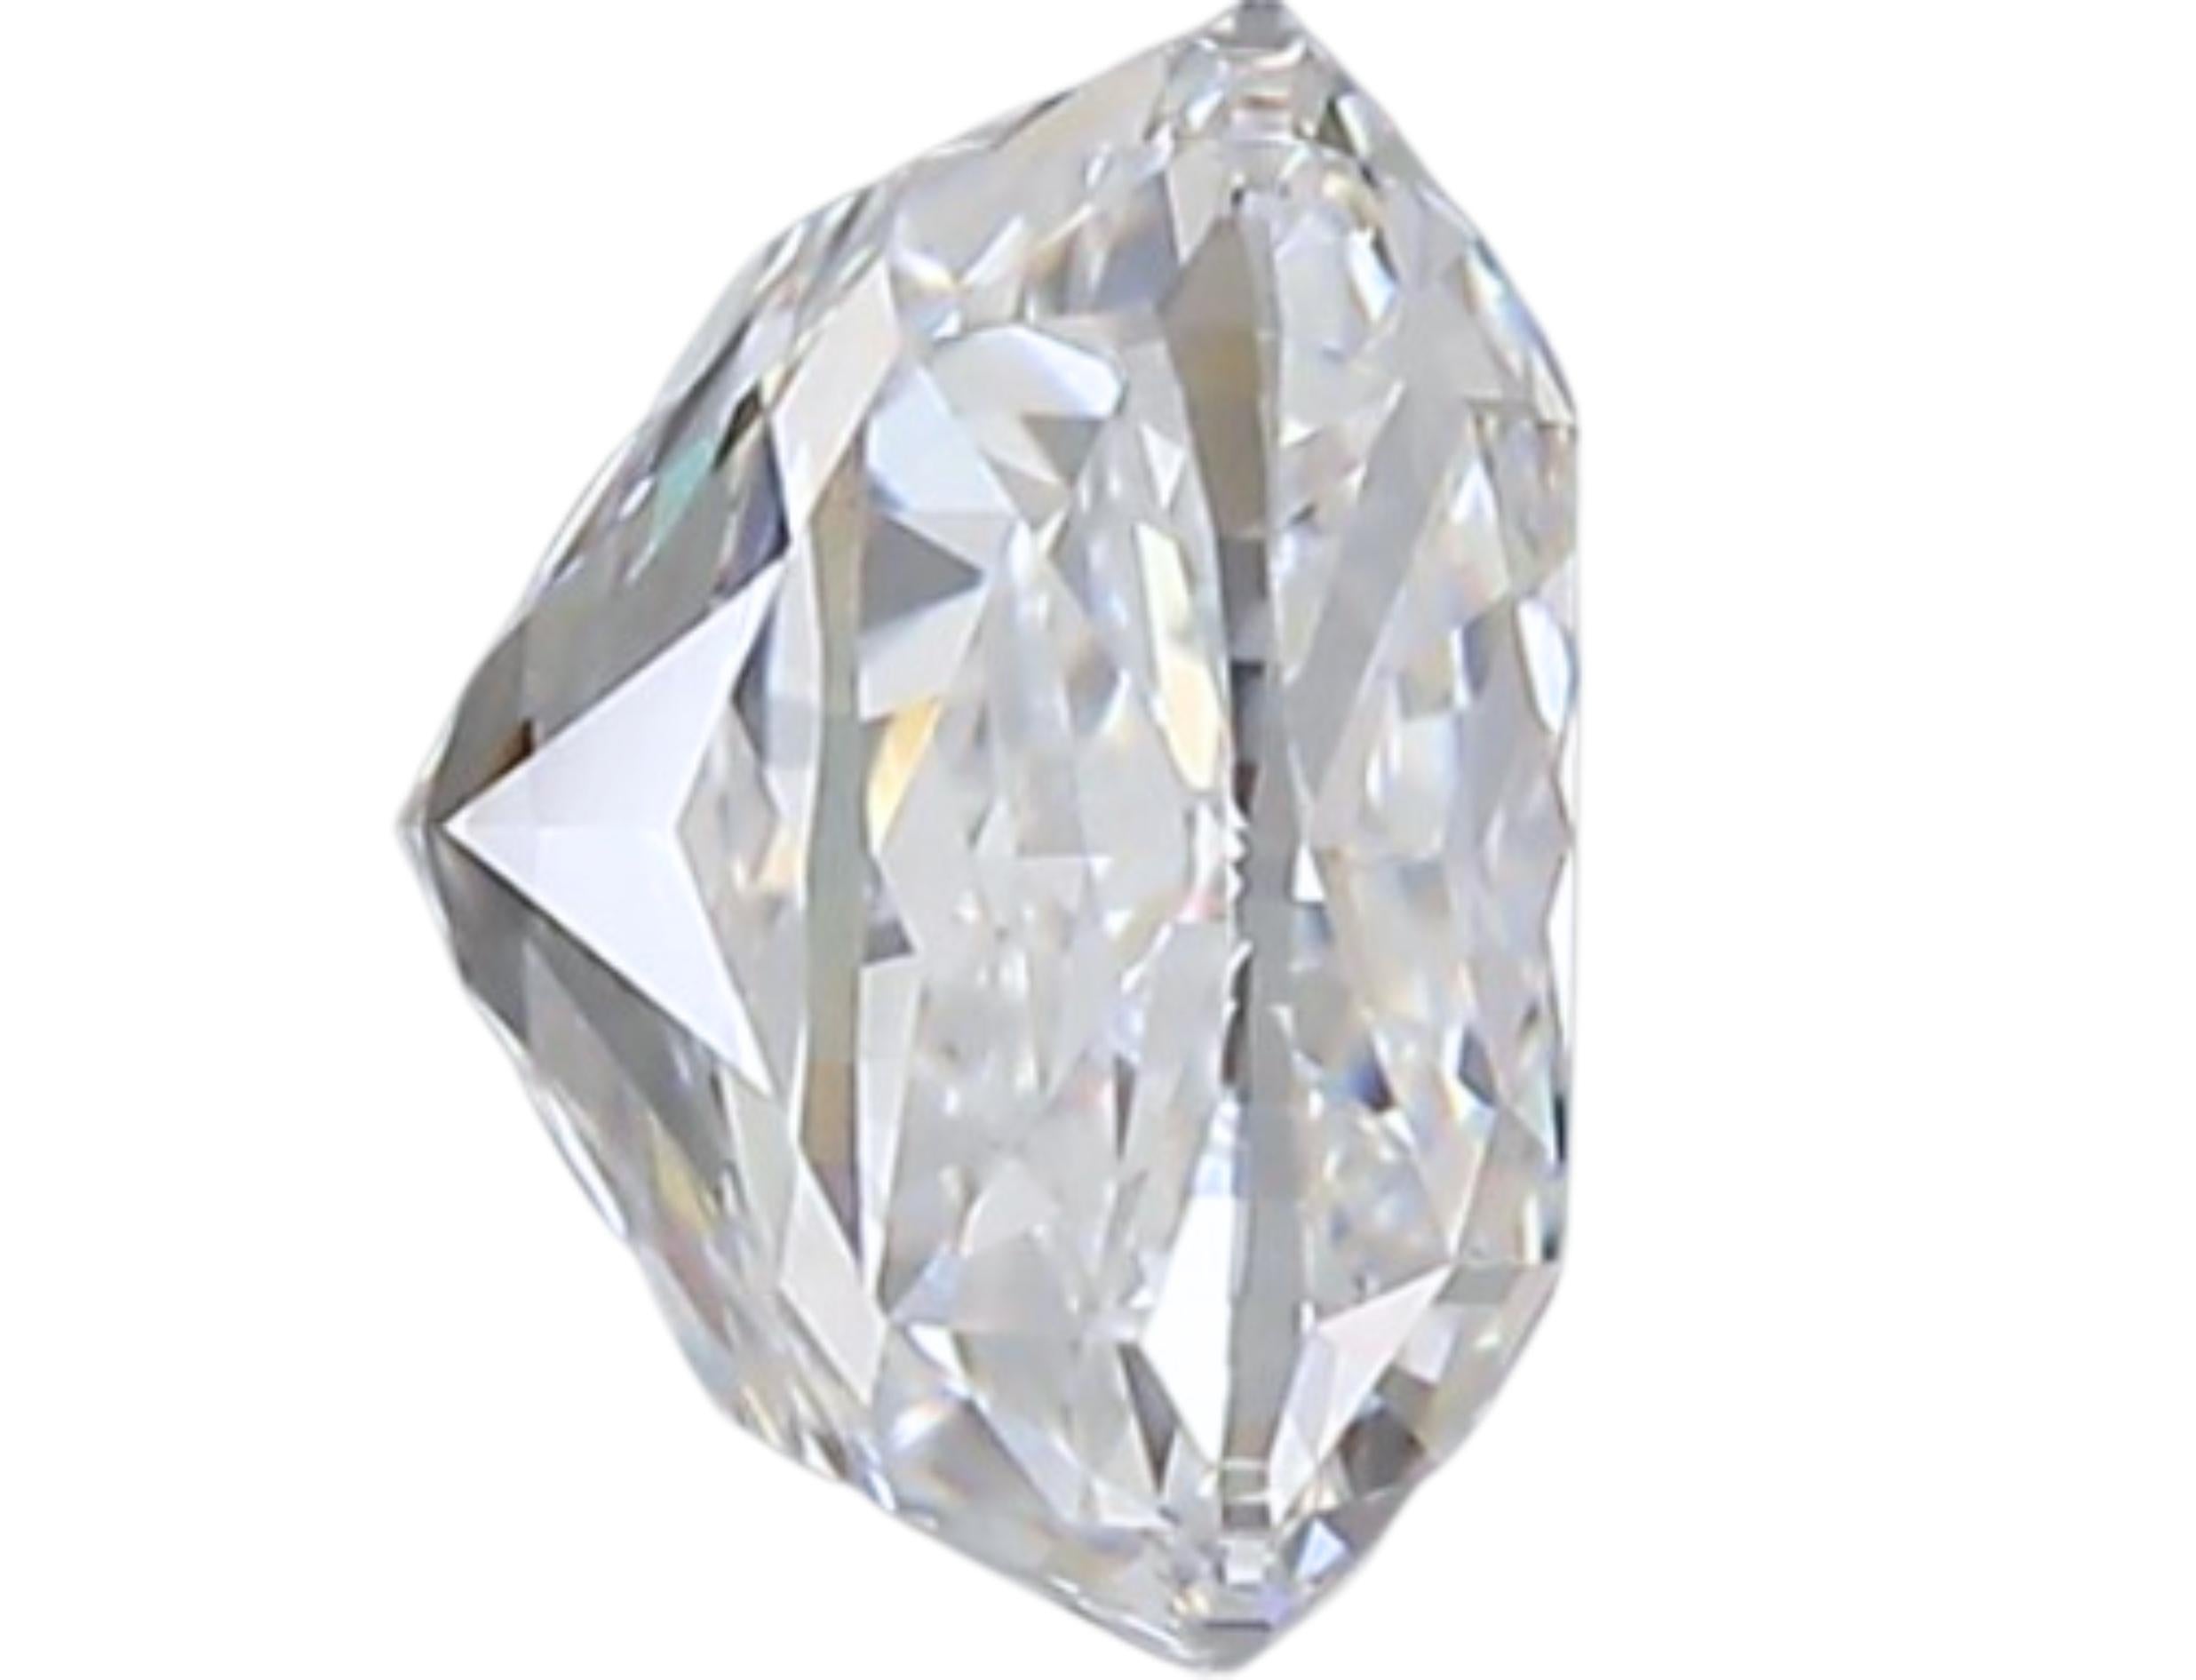 Natural cut Cushion diamond in a 1.50 carat D VVS2 cut. This diamond comes with GIA Certificate and laser inscription number.

Experience the timeless allure of our 1.50-carat, D-color, VVS2-clarity Cushion-cut natural diamond, meticulously crafted